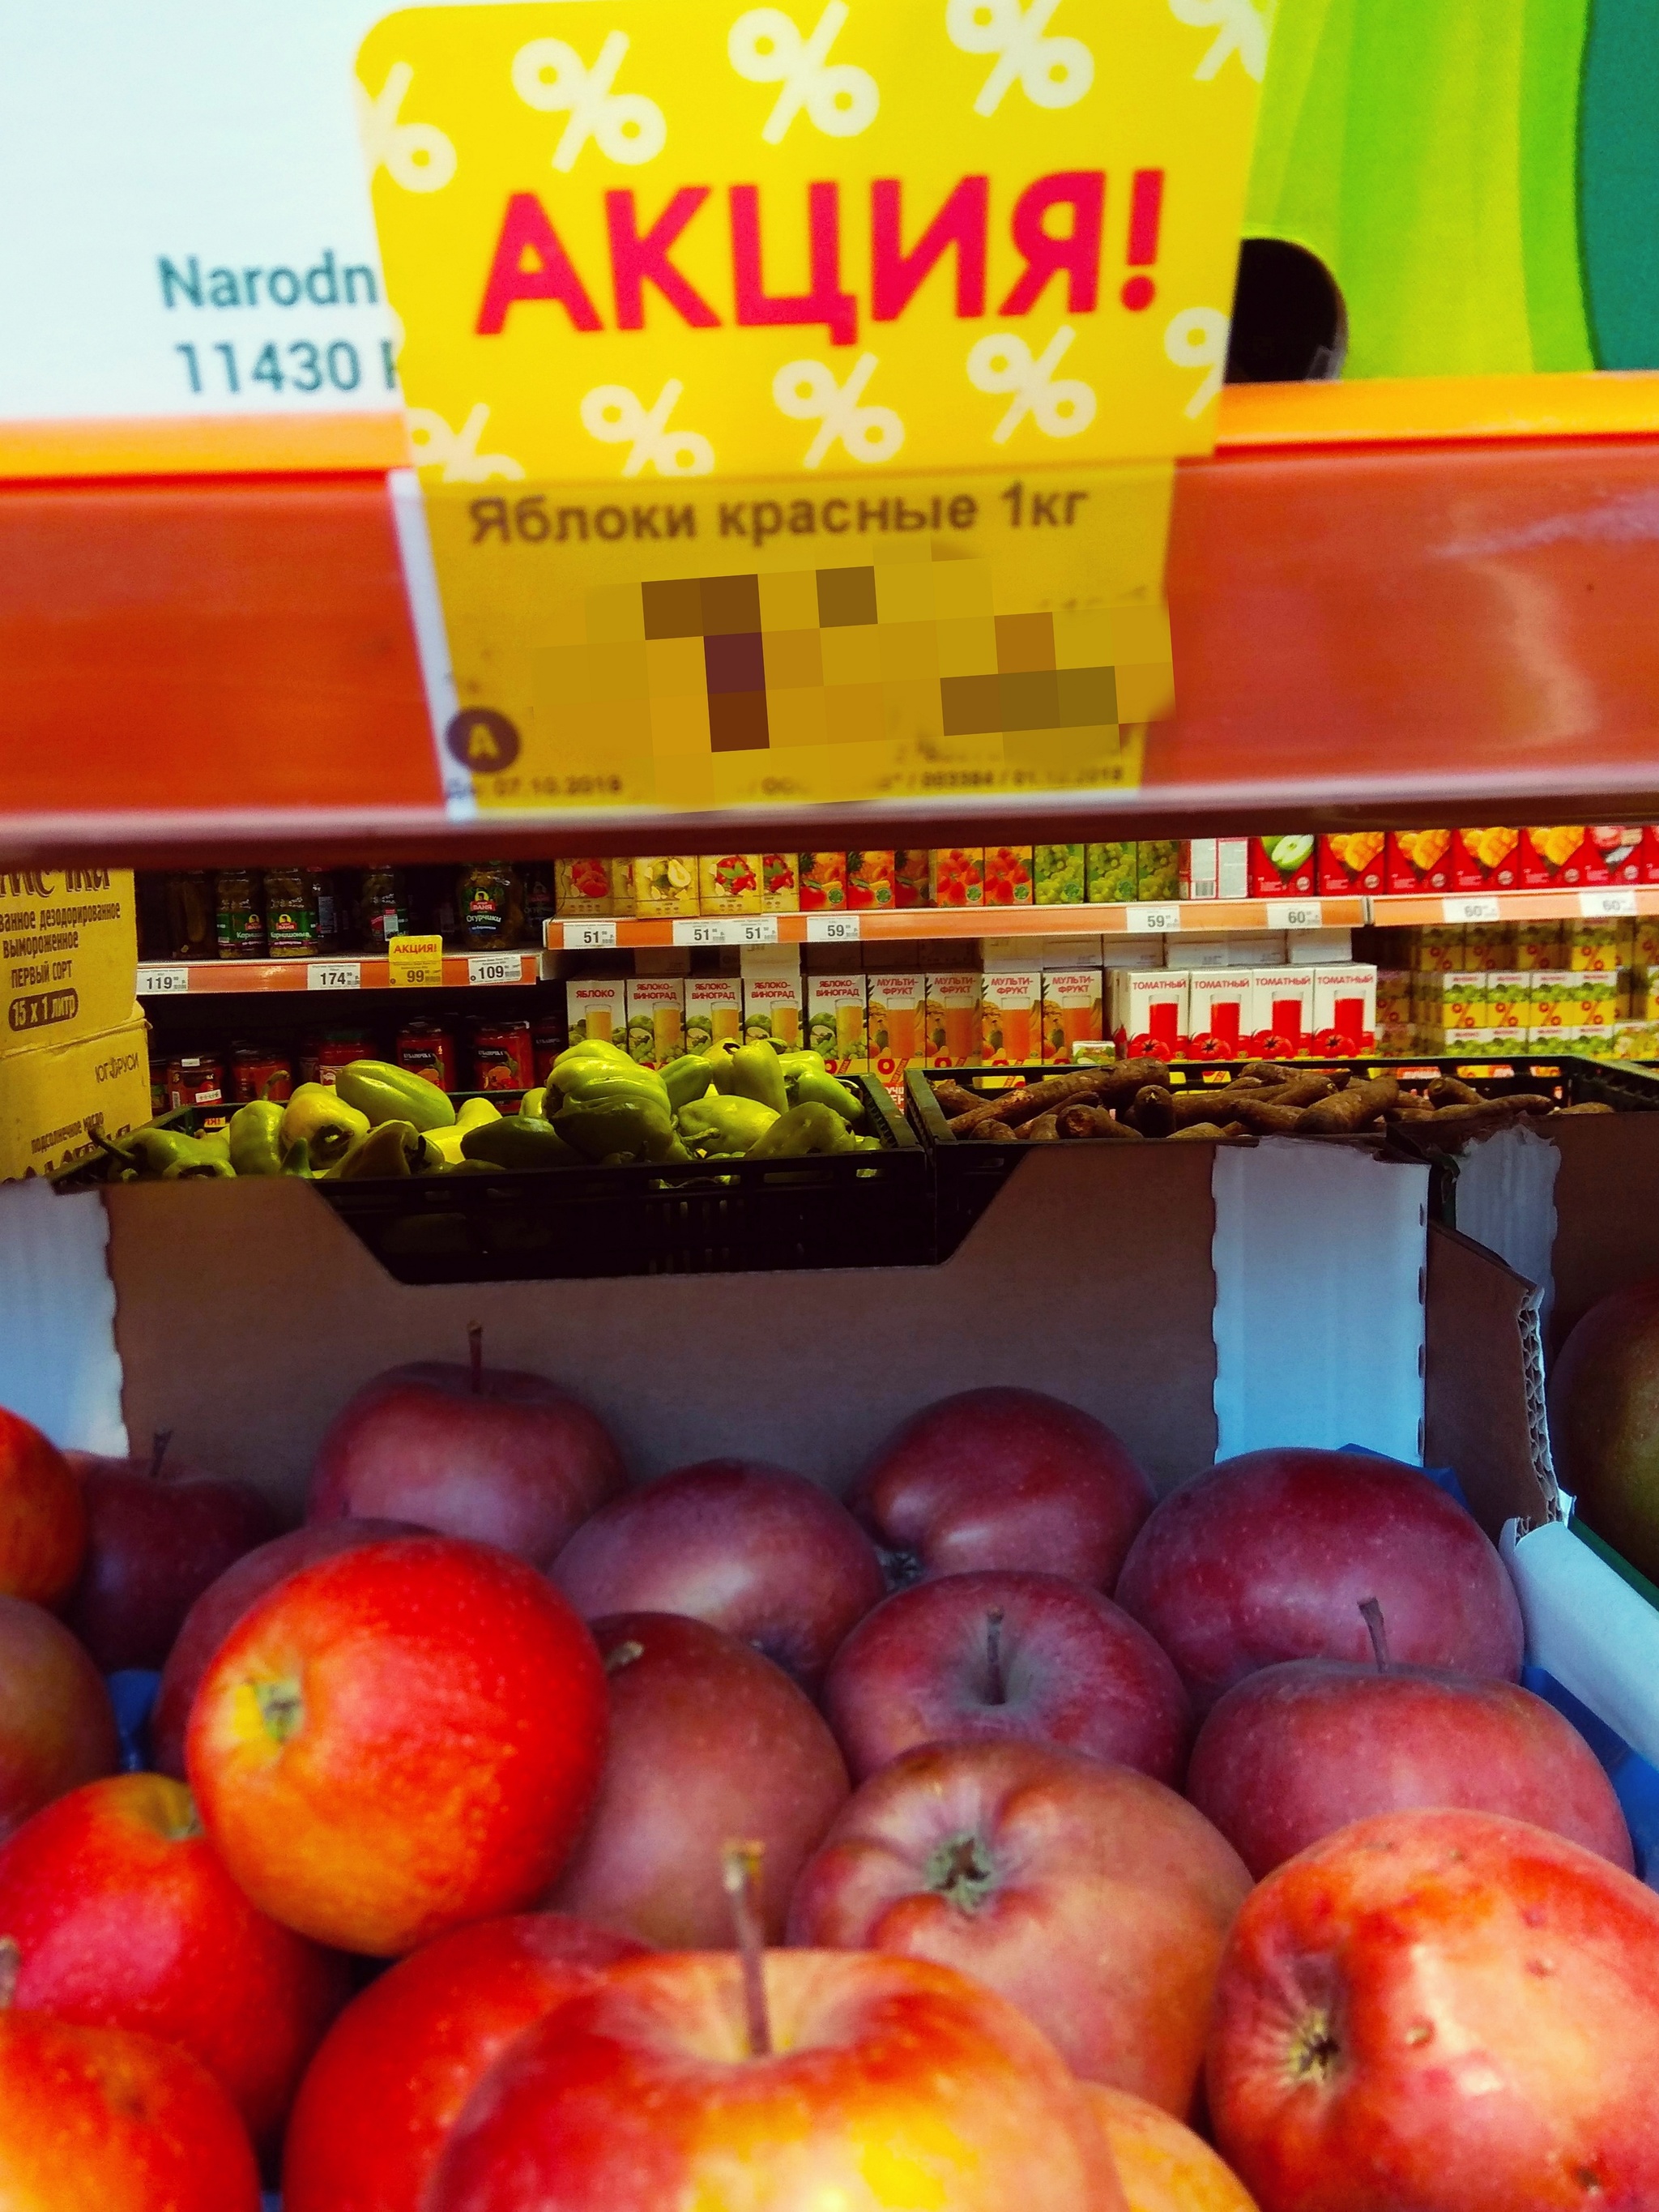 Correct price tags. - My, Price tag, Score, Apples, Text, Reasoning, Longpost